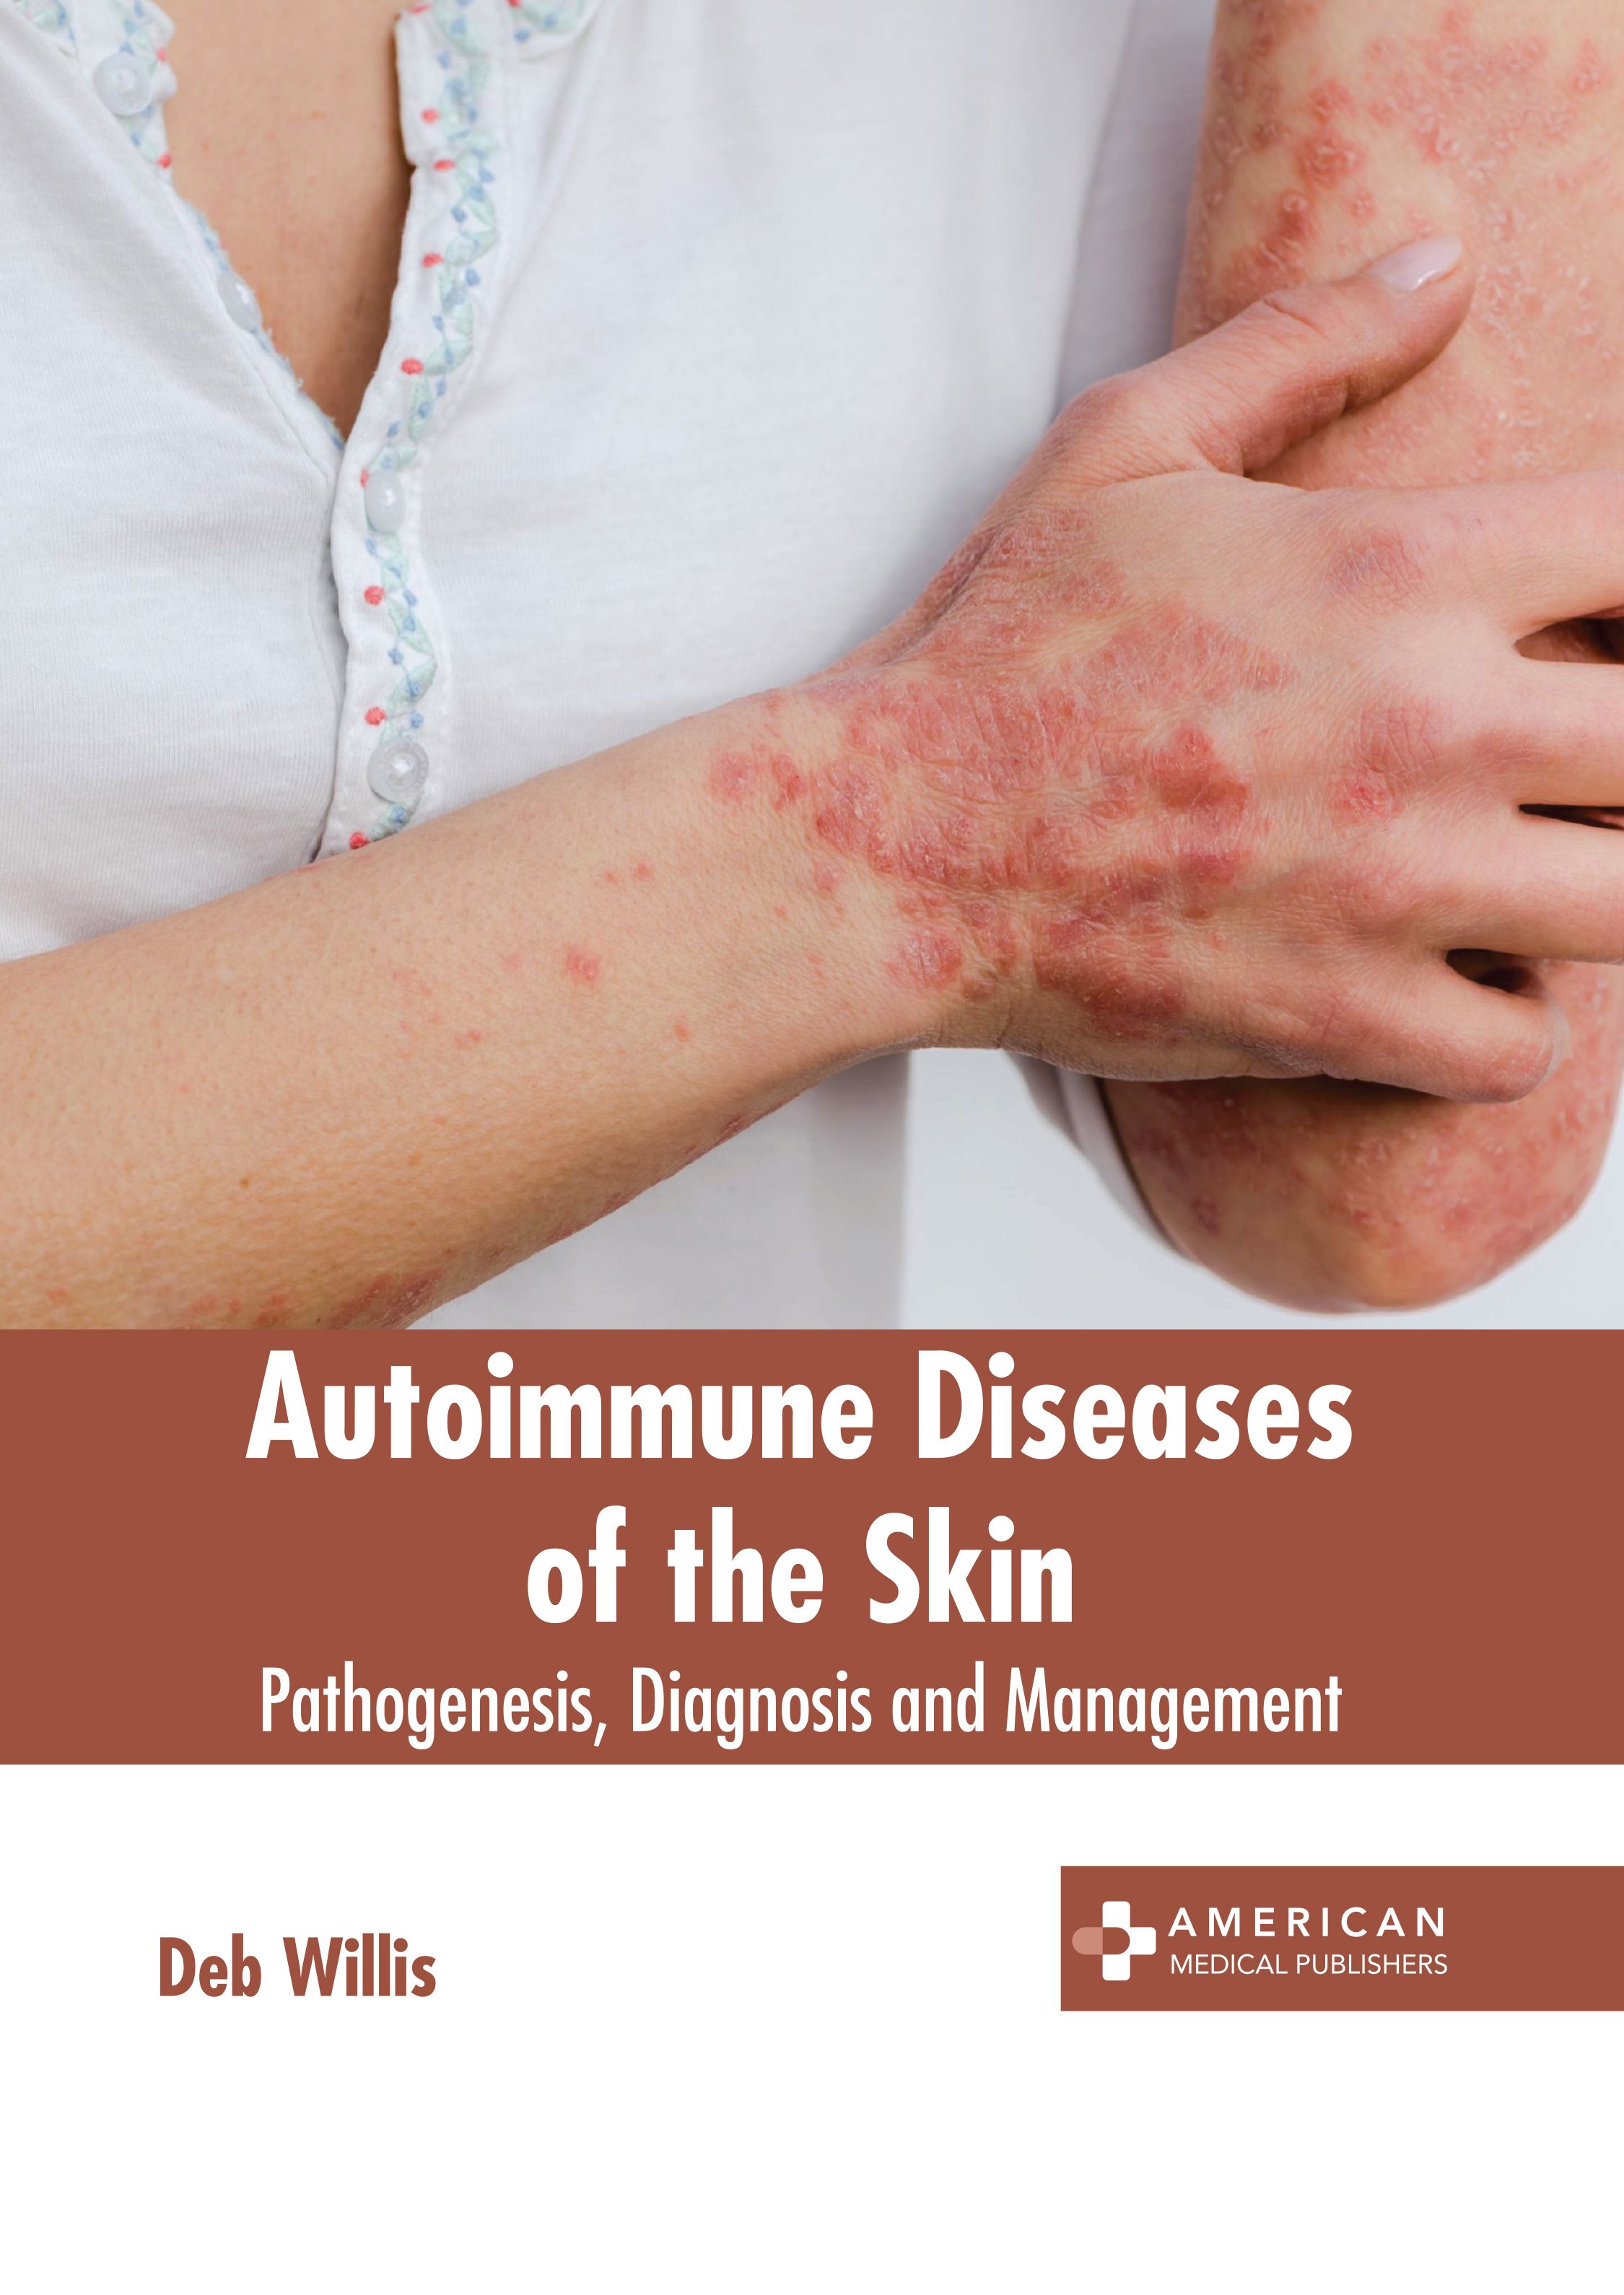 exclusive-publishers/american-medical-publishers/autoimmune-diseases-of-the-skin-pathogenesis-diagnosis-and-management-9781639279036